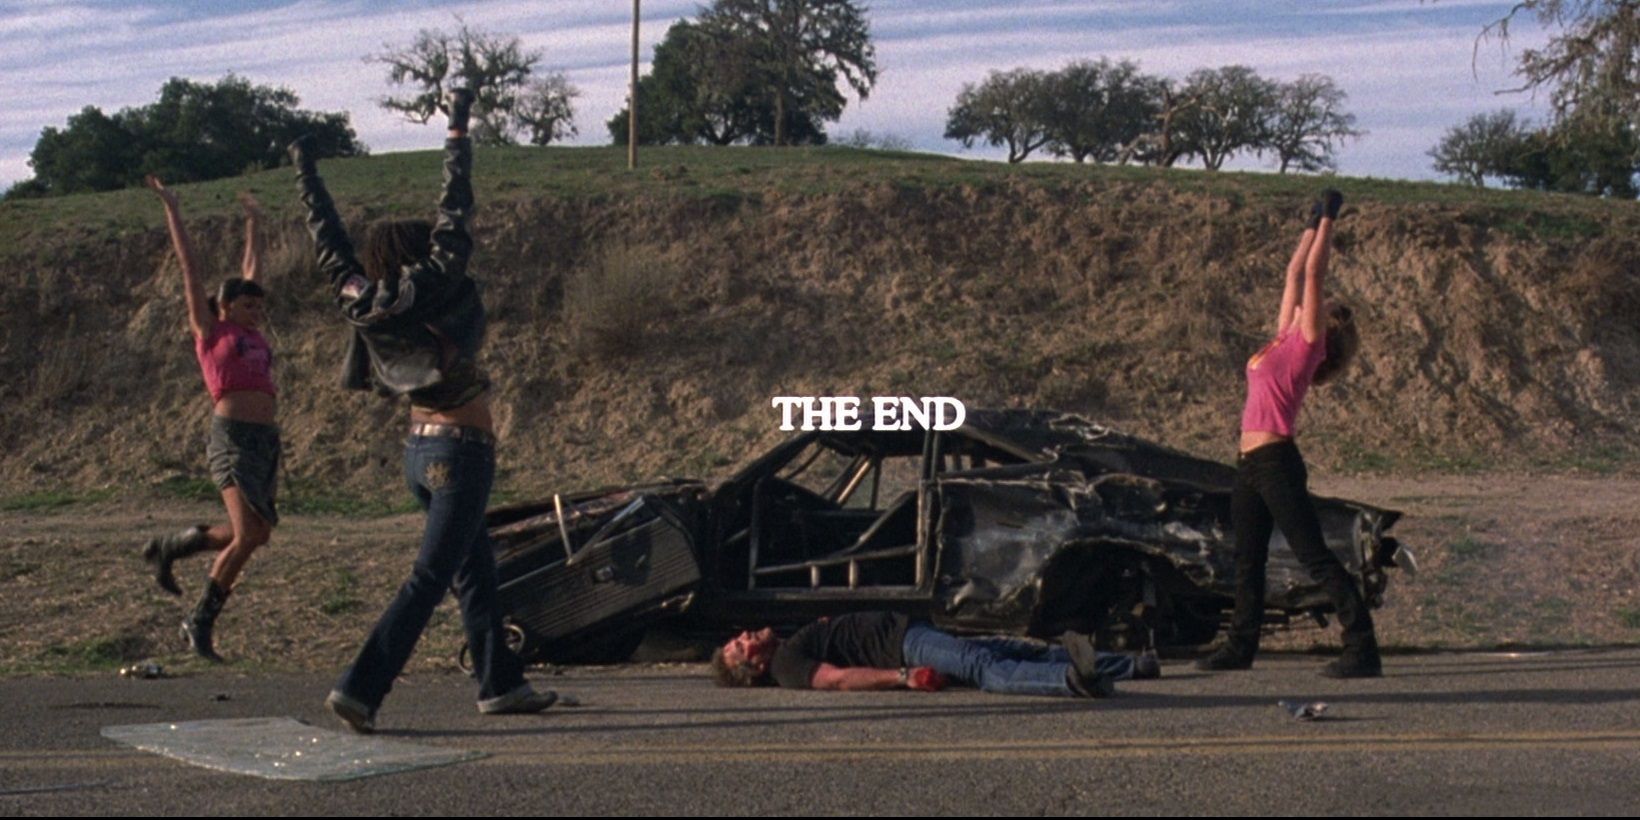 The ending of Death Proof